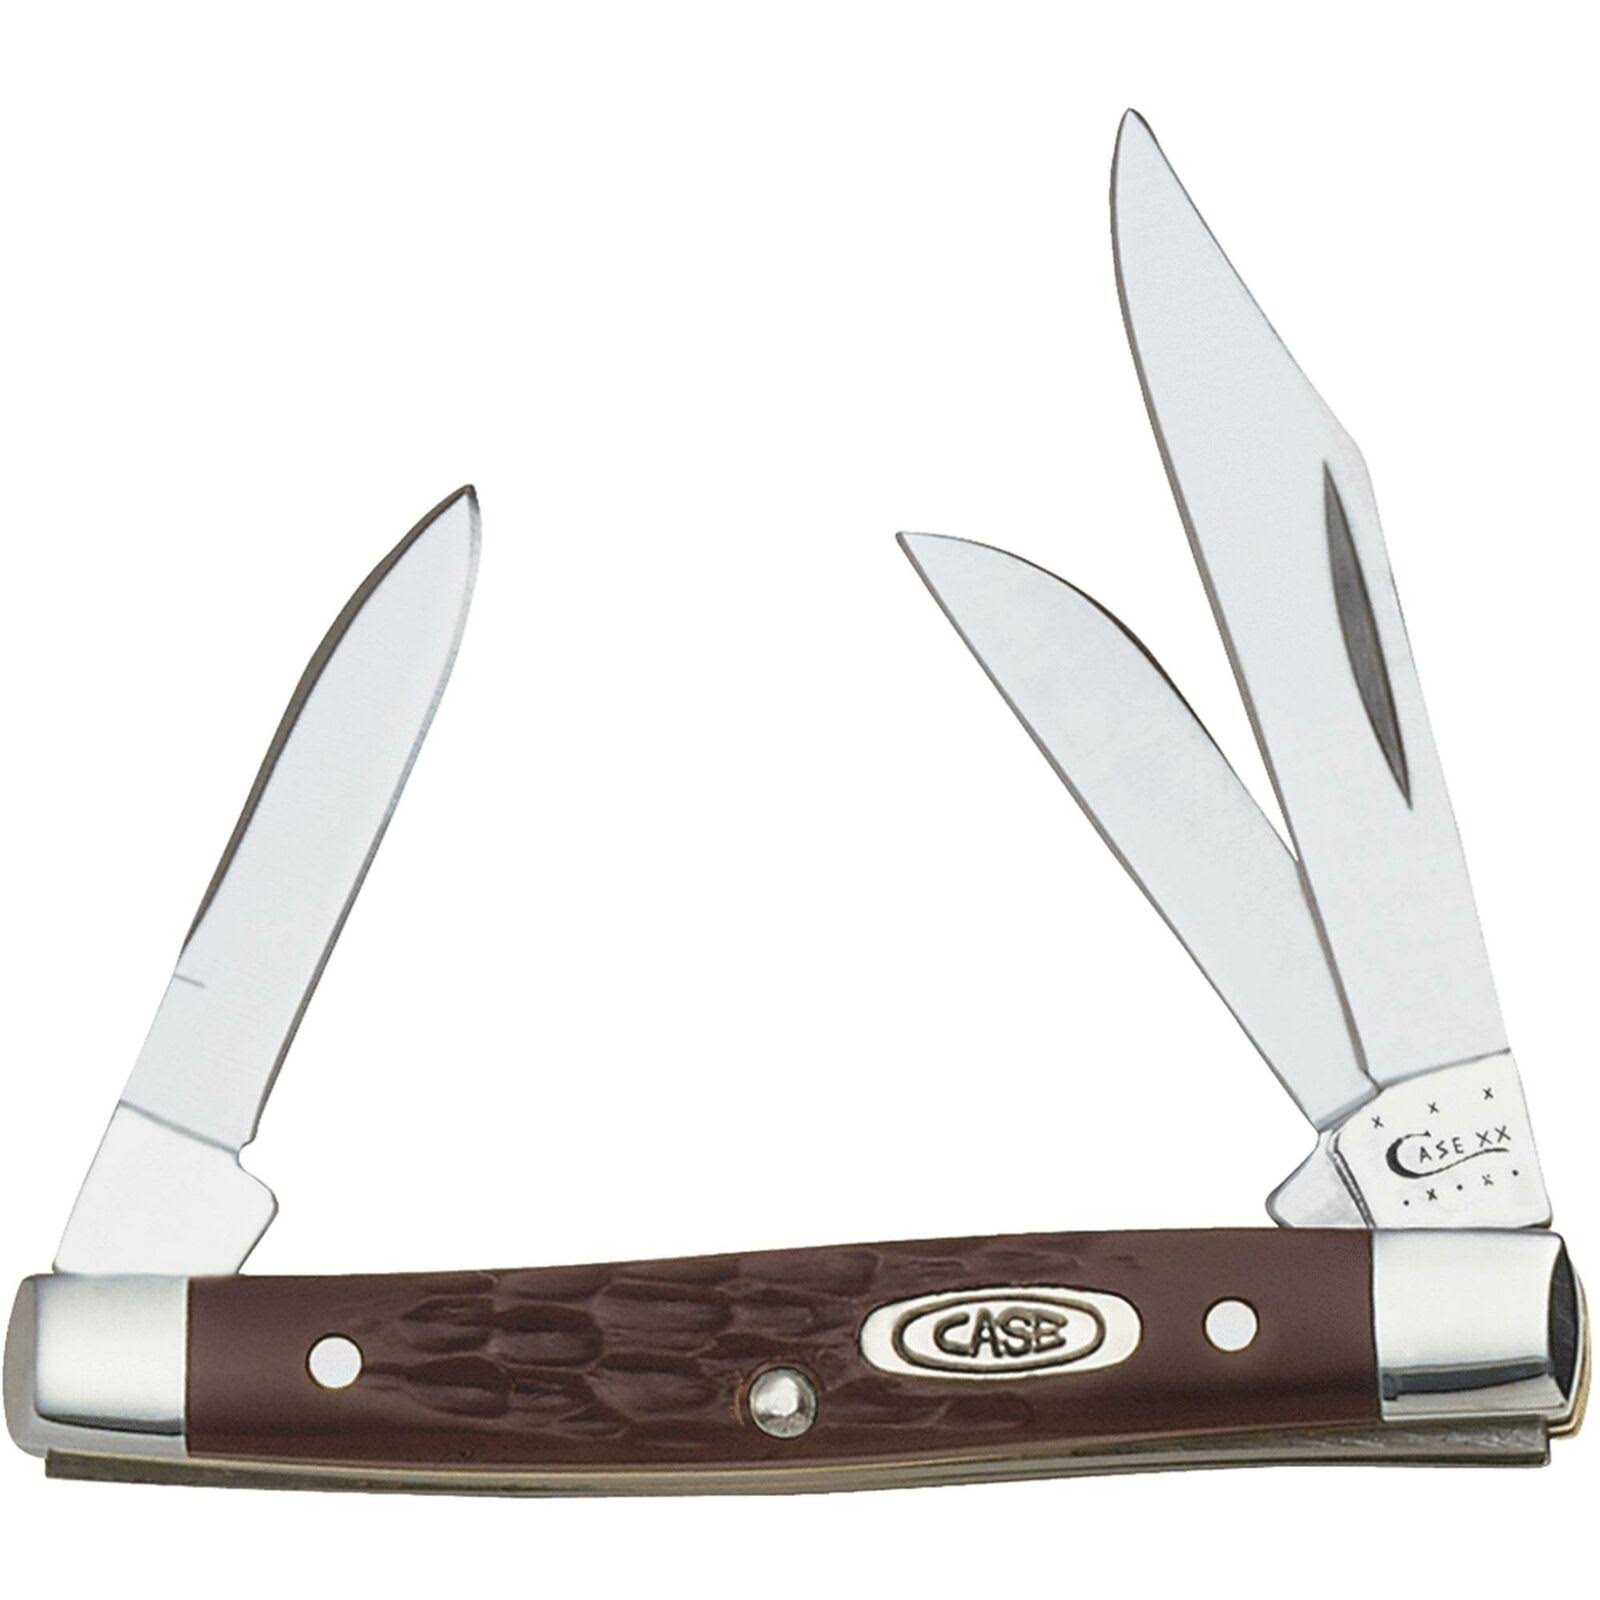 Case Stockman Pocket Knife - Brown, Small